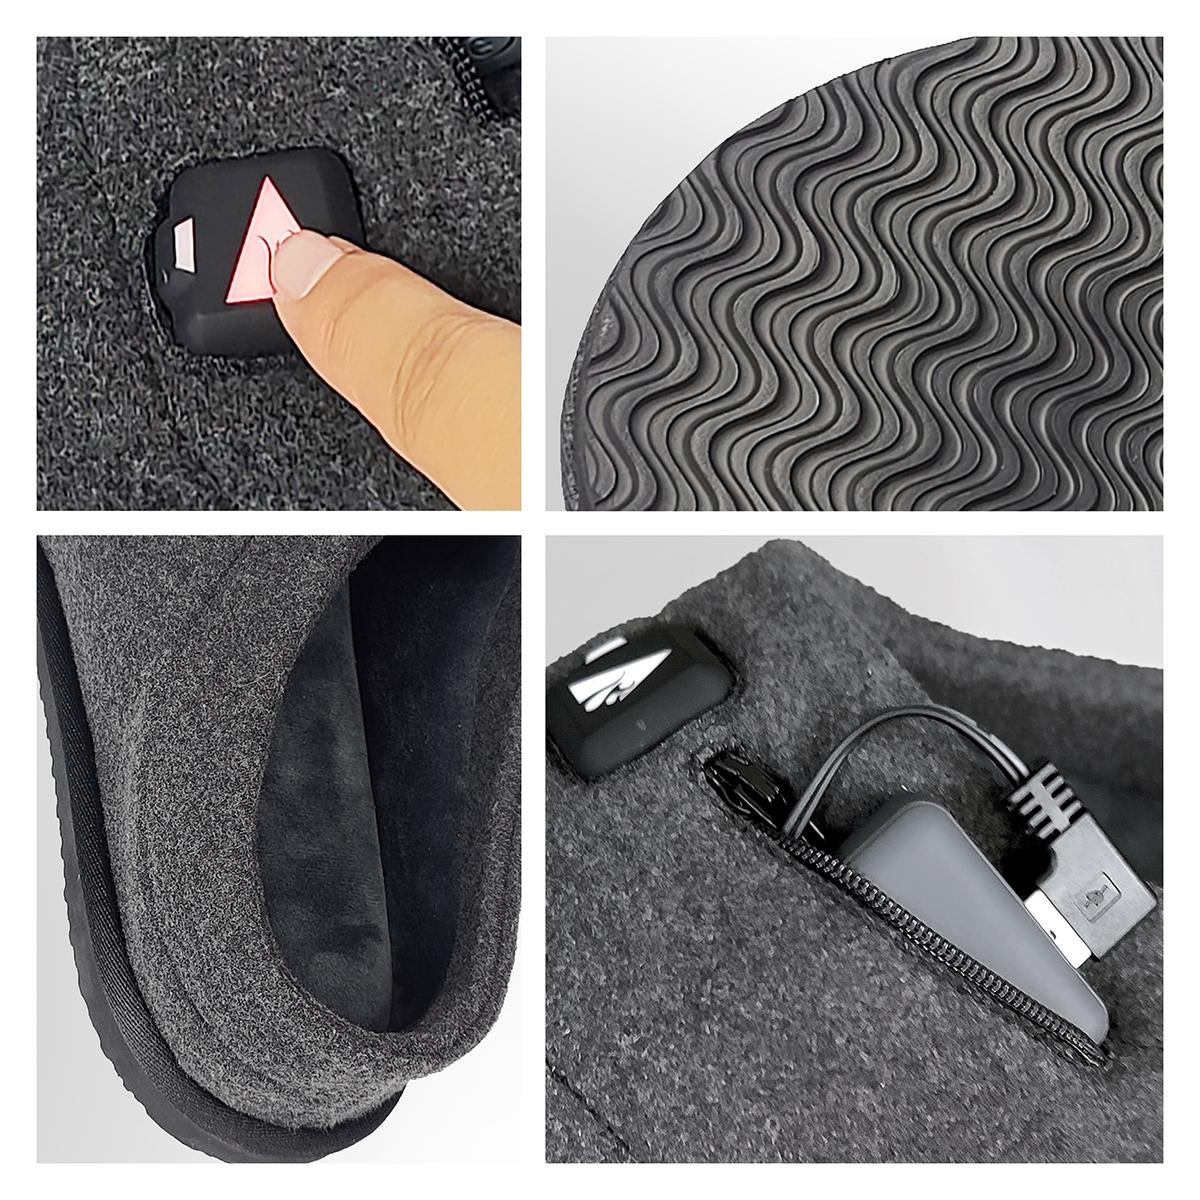 ActionHeat 5V Battery Heated Slippers - Right